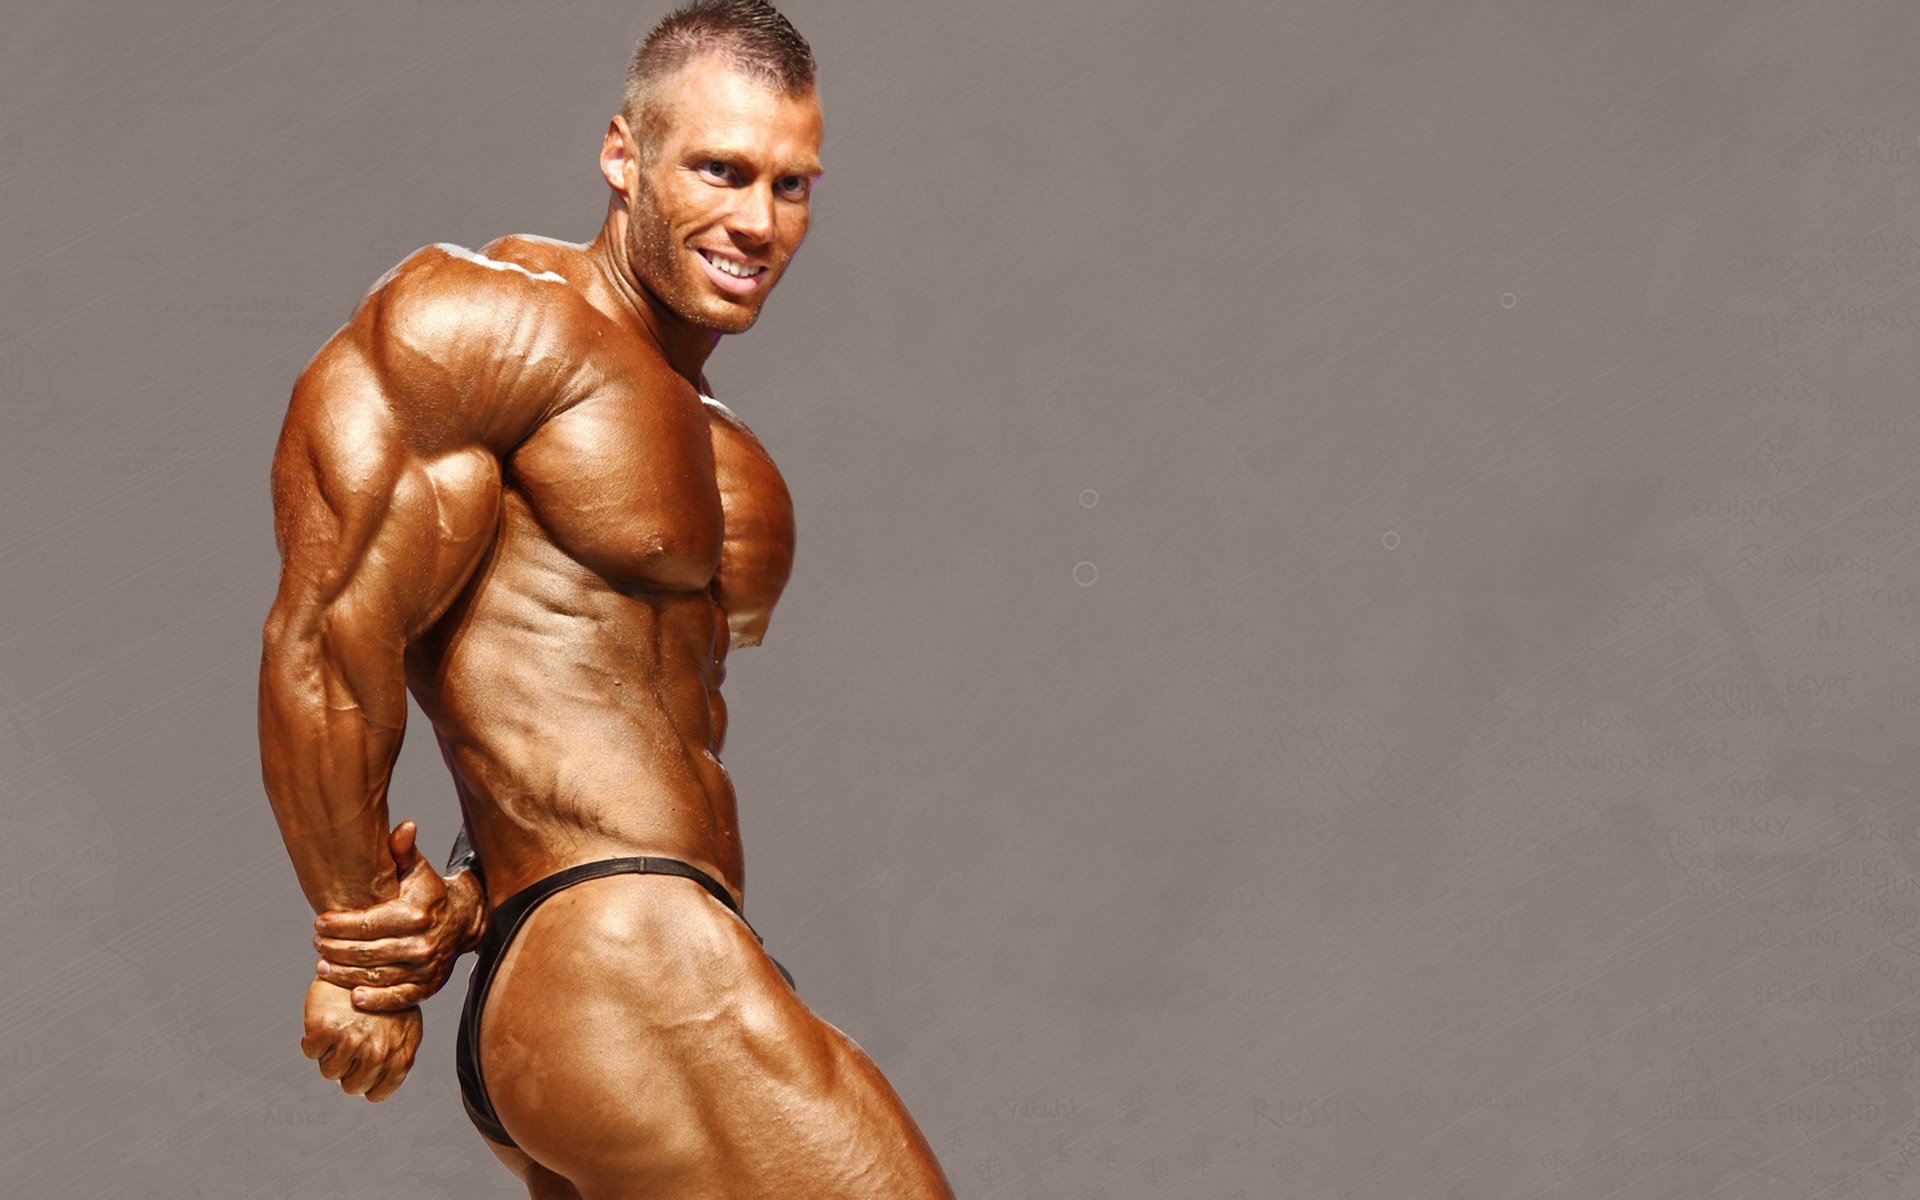 body building, Fitness, Muscle, Muscles, Weight, Lifting, Bodybuilding,  3 Wallpaper